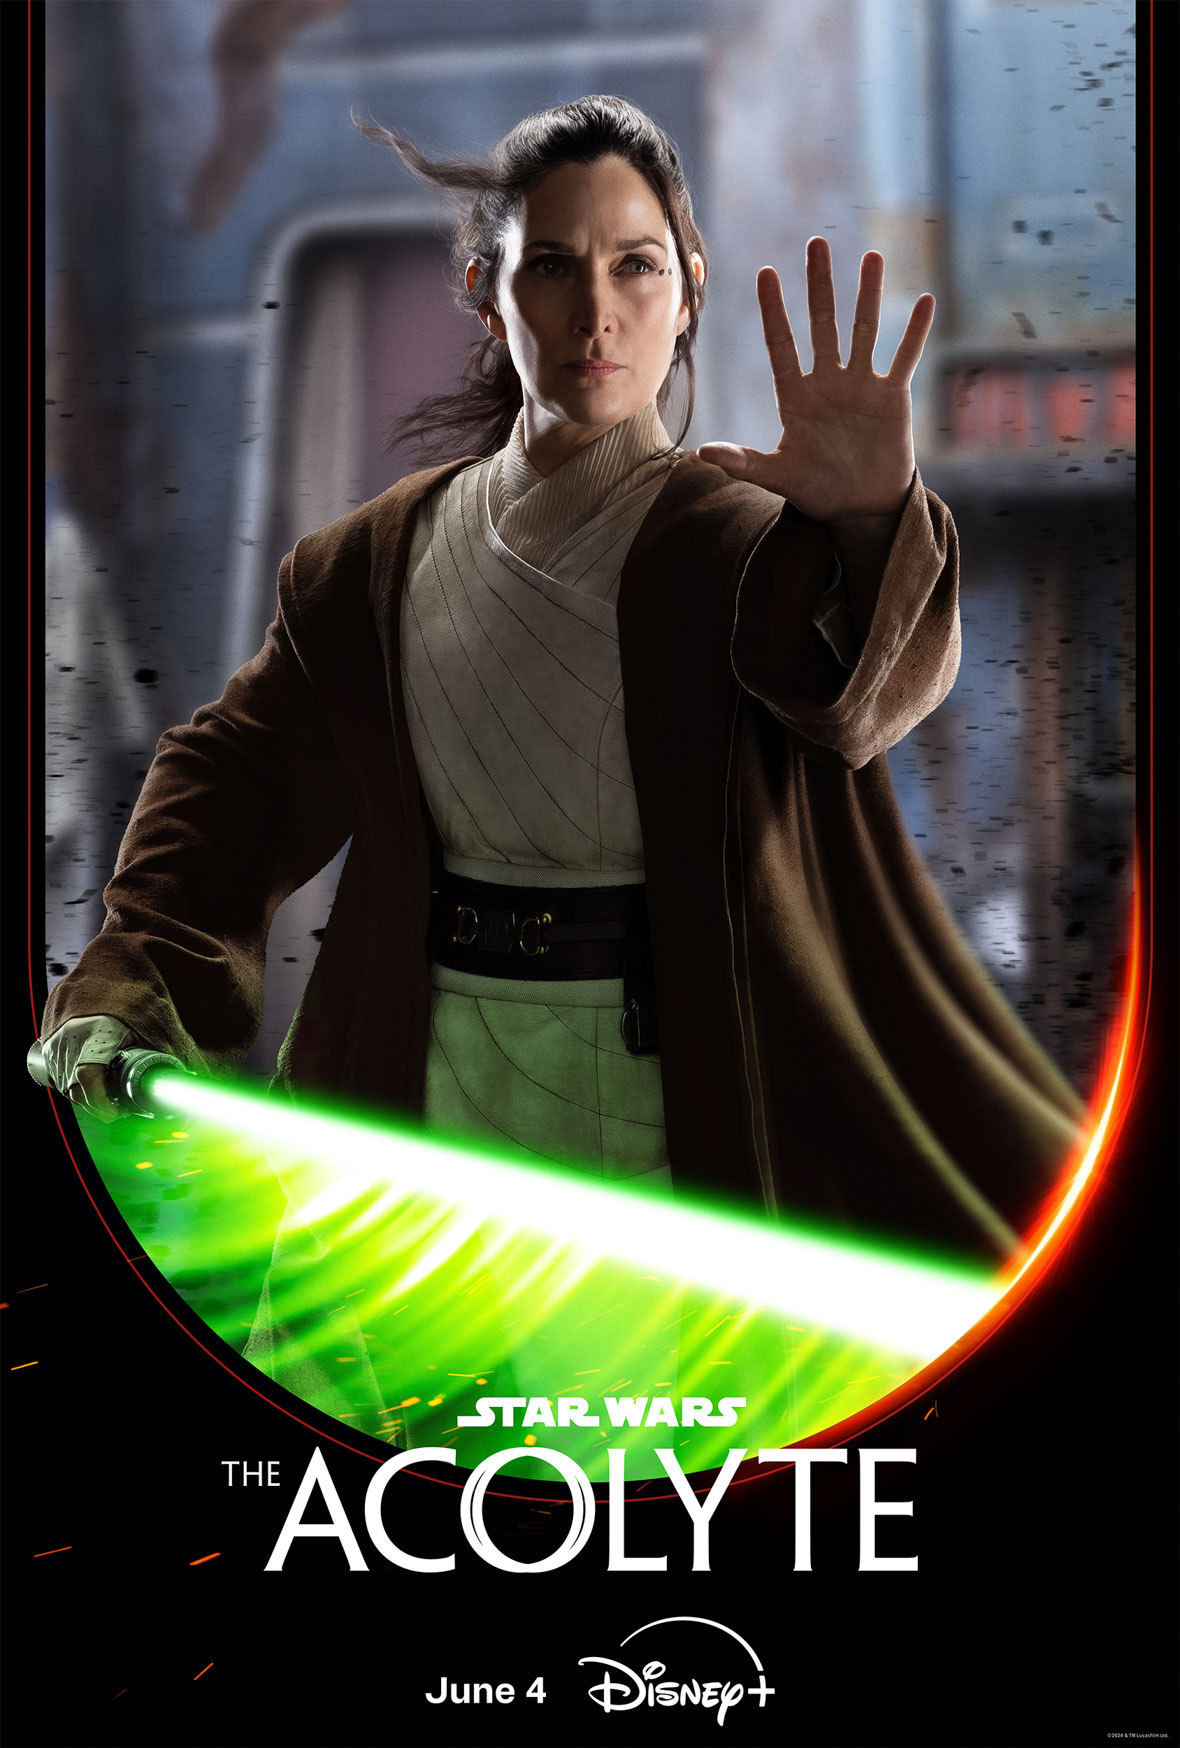 Jedi Master Indara faces the camera, her left hand held forward in the “stop” motion. She holds her ignited green lightsaber in her right hand. A black border frames the bottom of the image with the logo for Star Wars: The Acolyte written in white font.